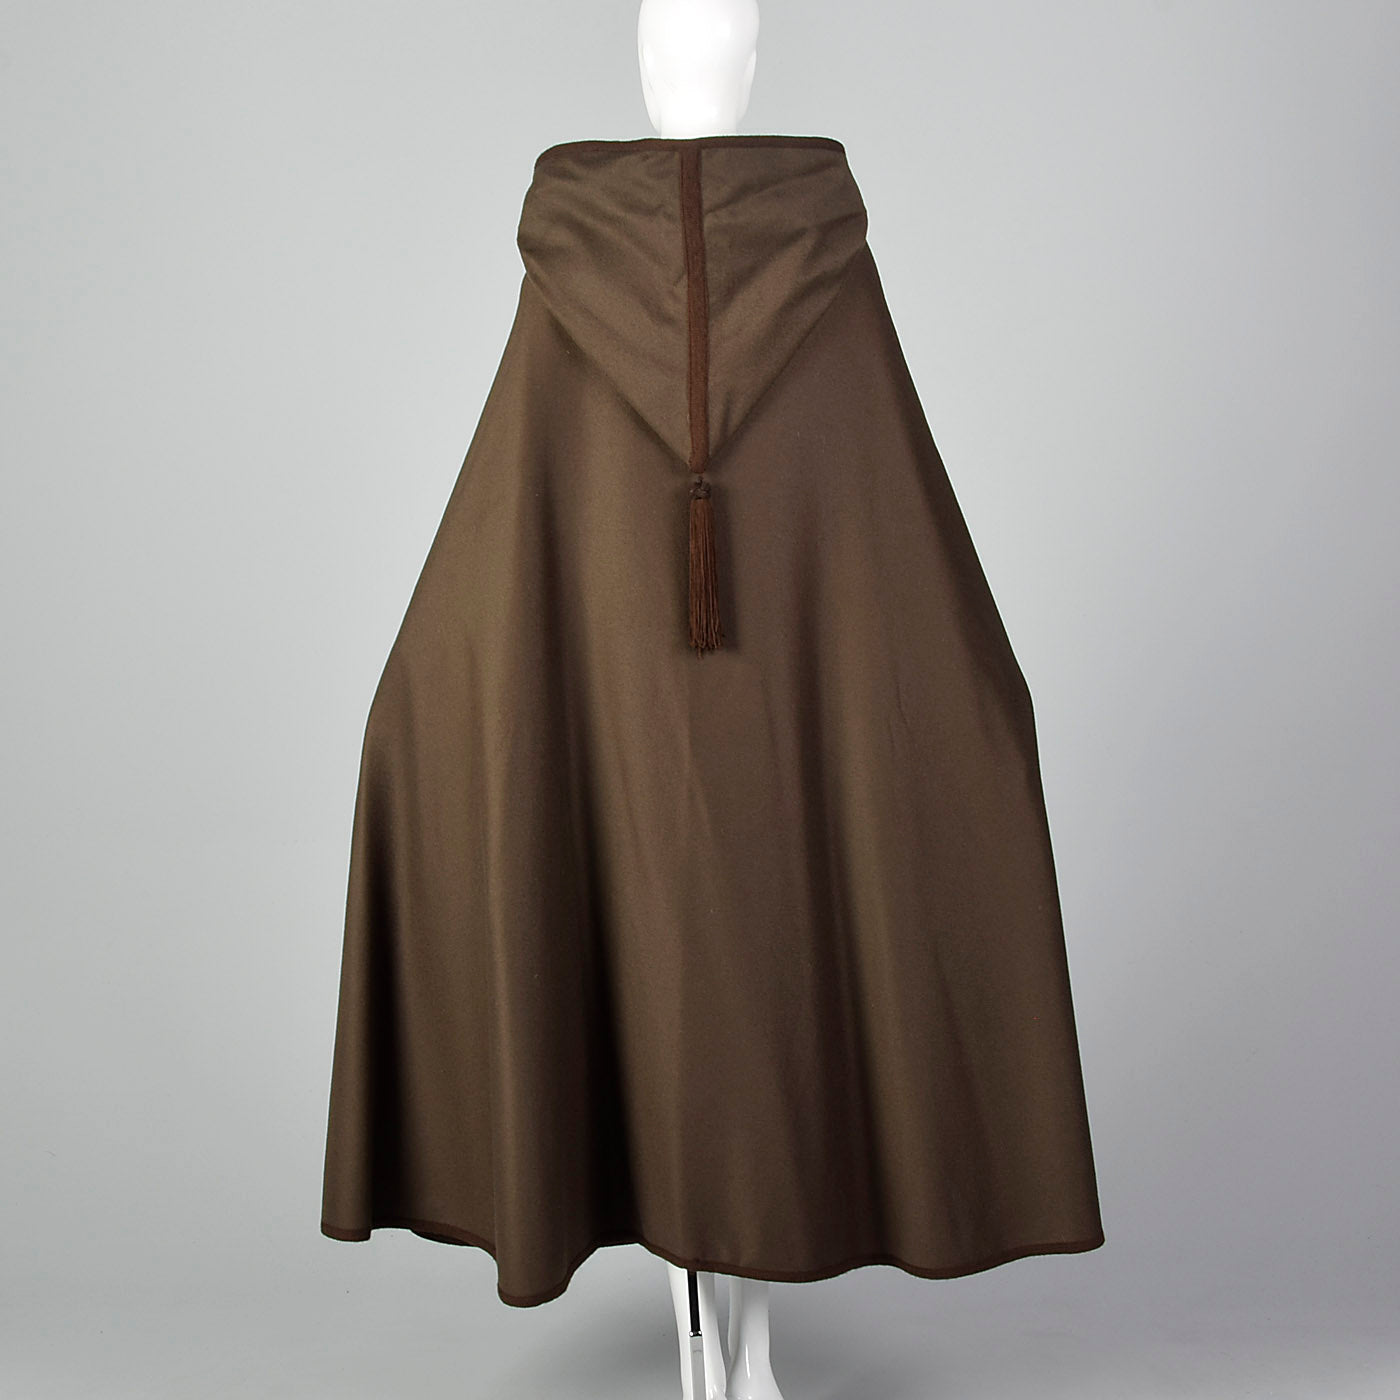 1976 Yves Saint Laurent Russian Collection Hooded Cape